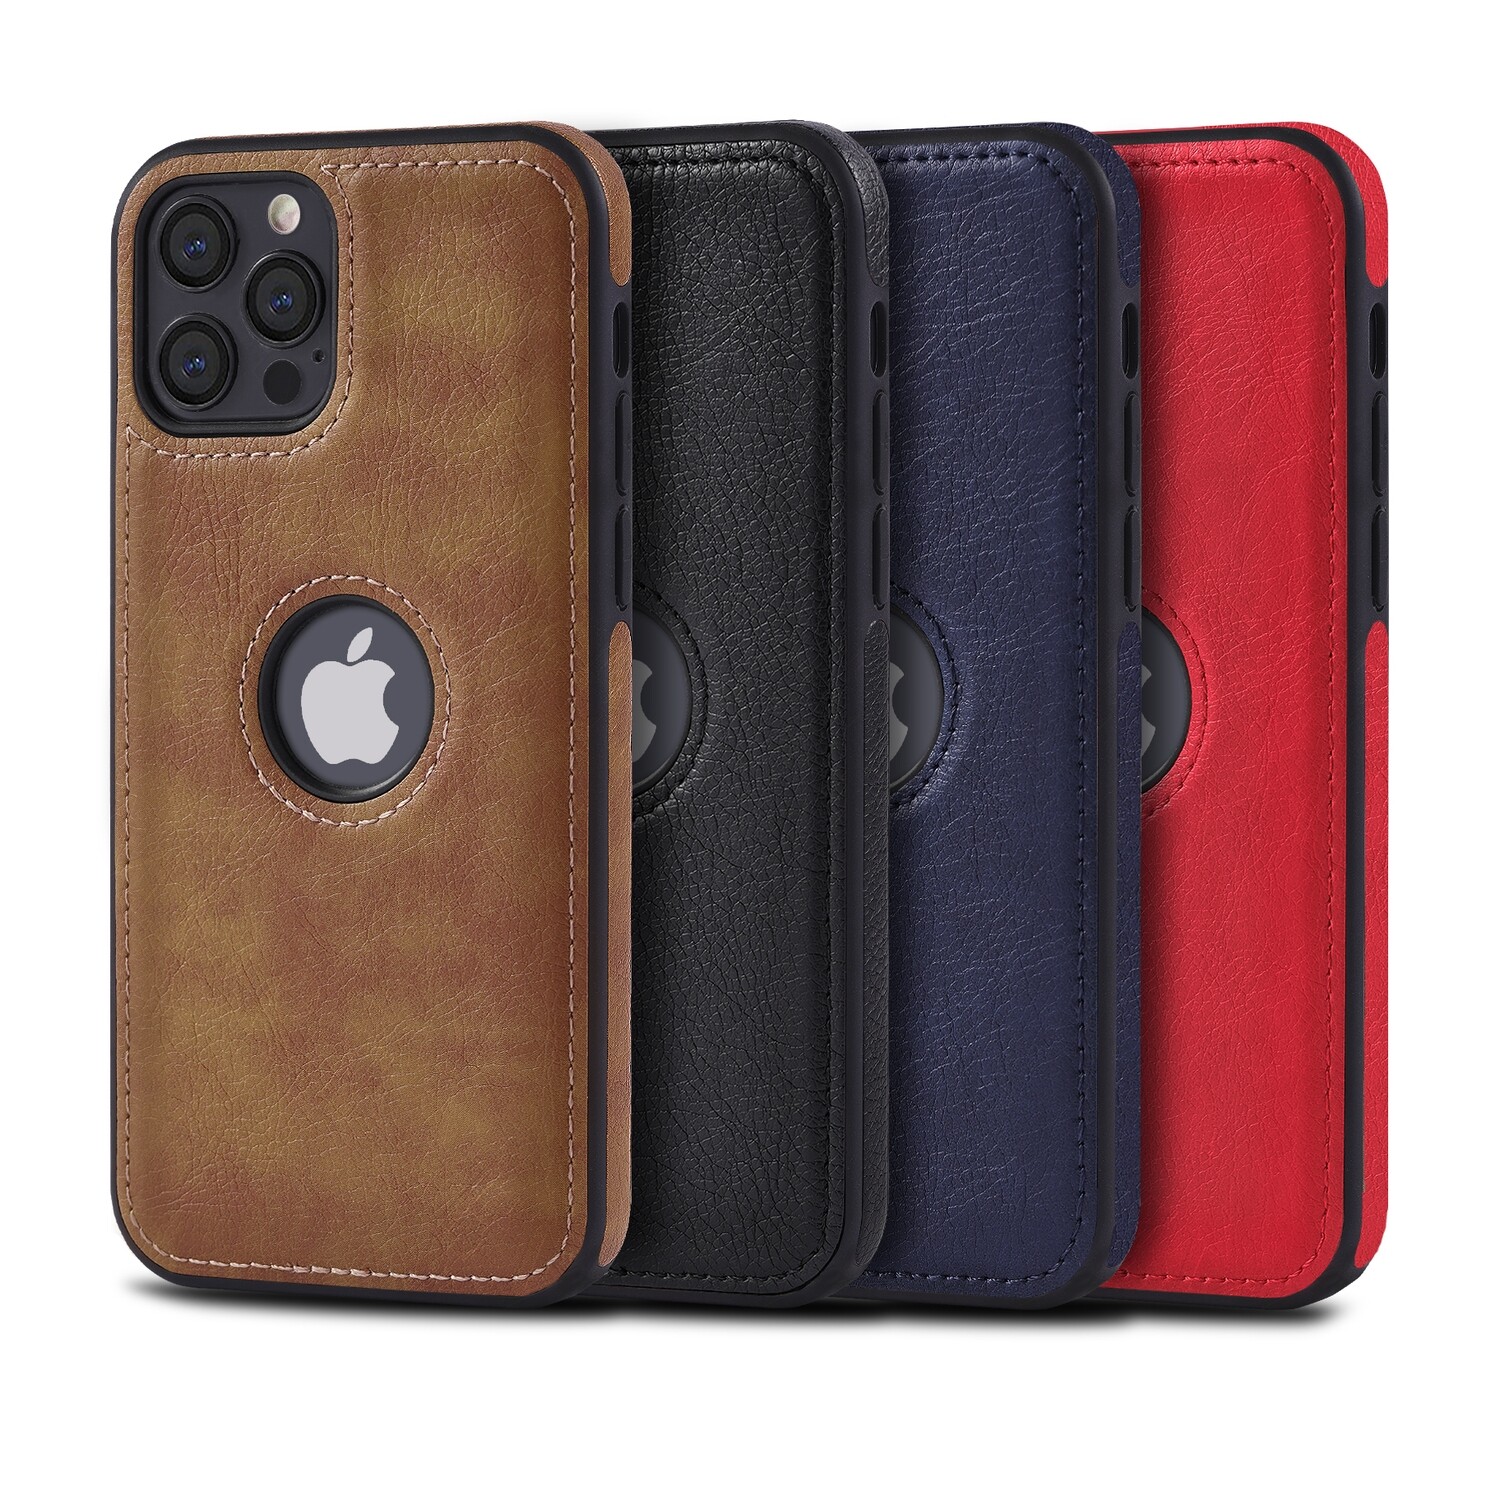 Luxury PU Leather Shockproof Business Style Mobile Phone Case for iPhone 11, 11Pro, 11 Pro Max, 12, 12 Pro, 12 Pro Max